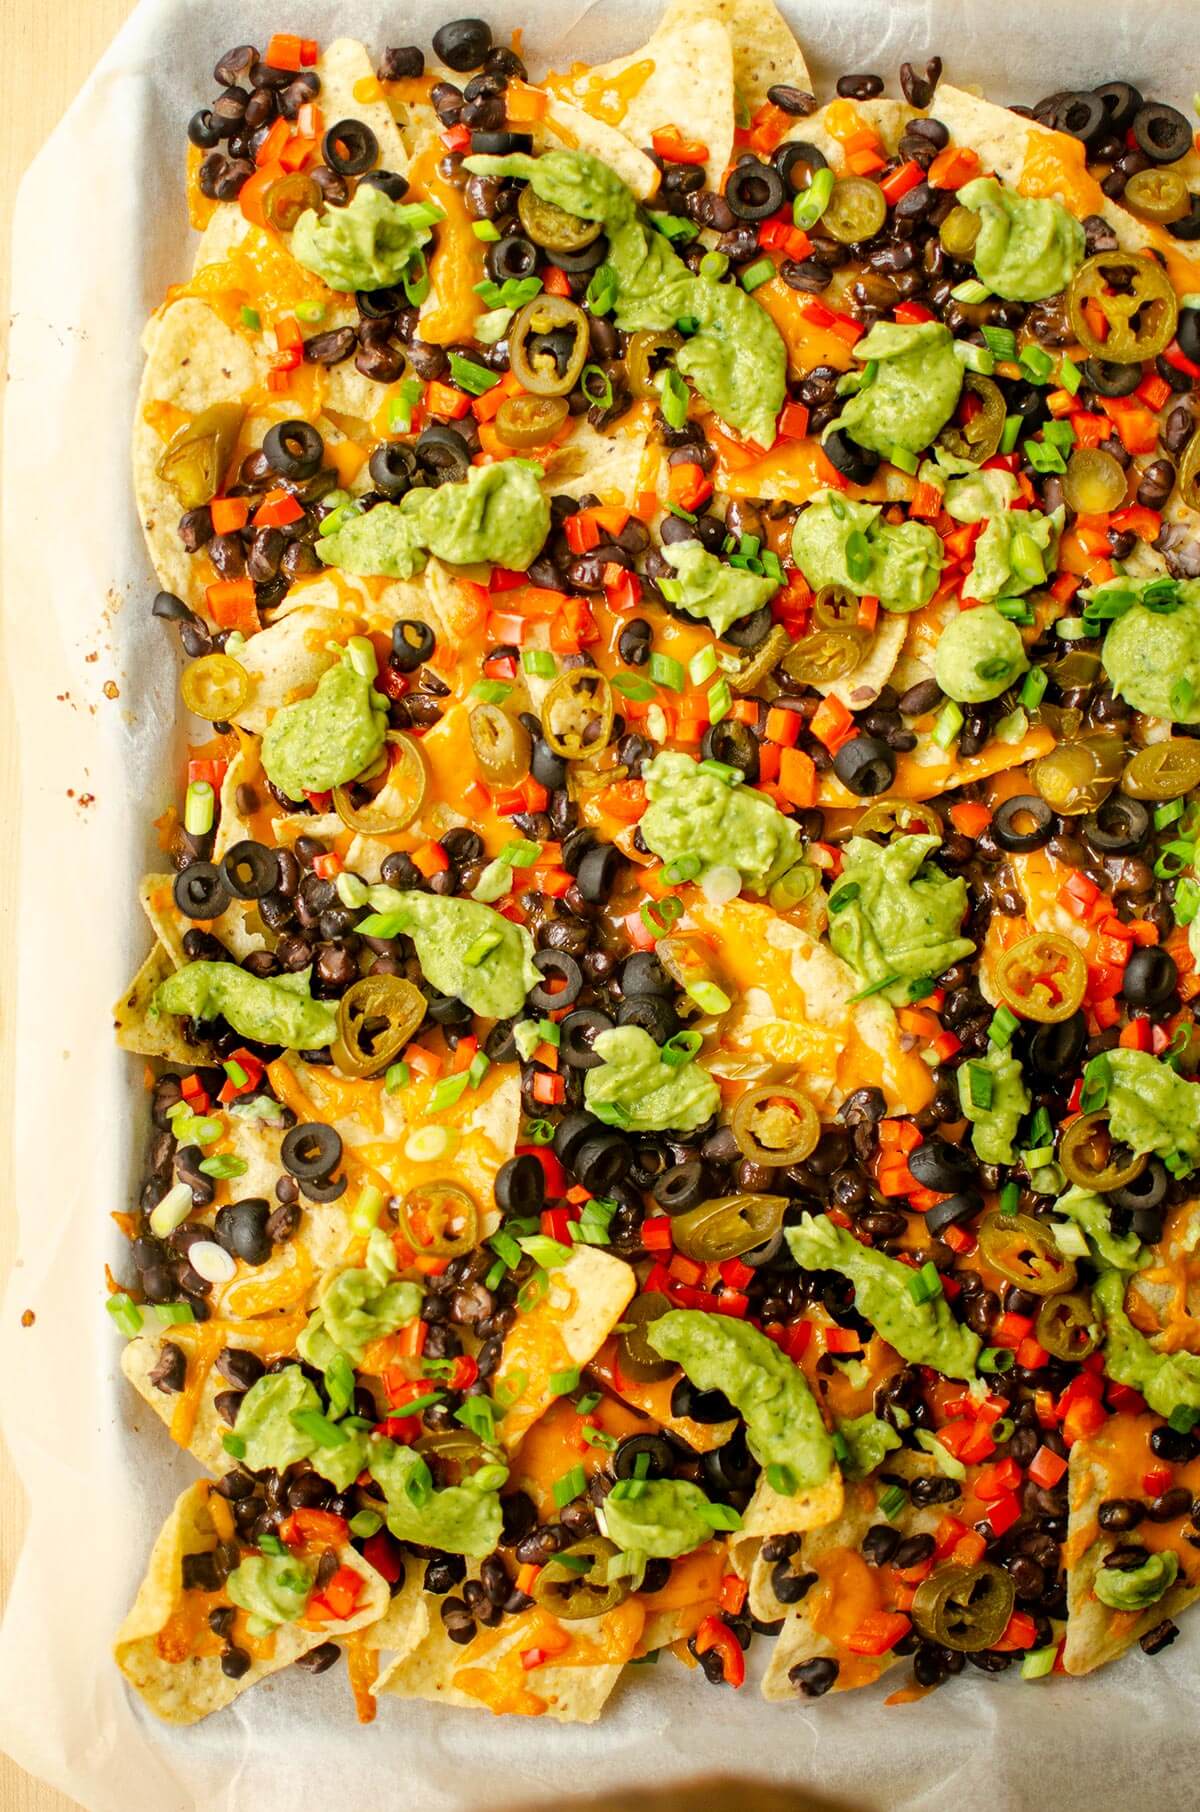 Cooked nachos on sheet pan with all the toppings.